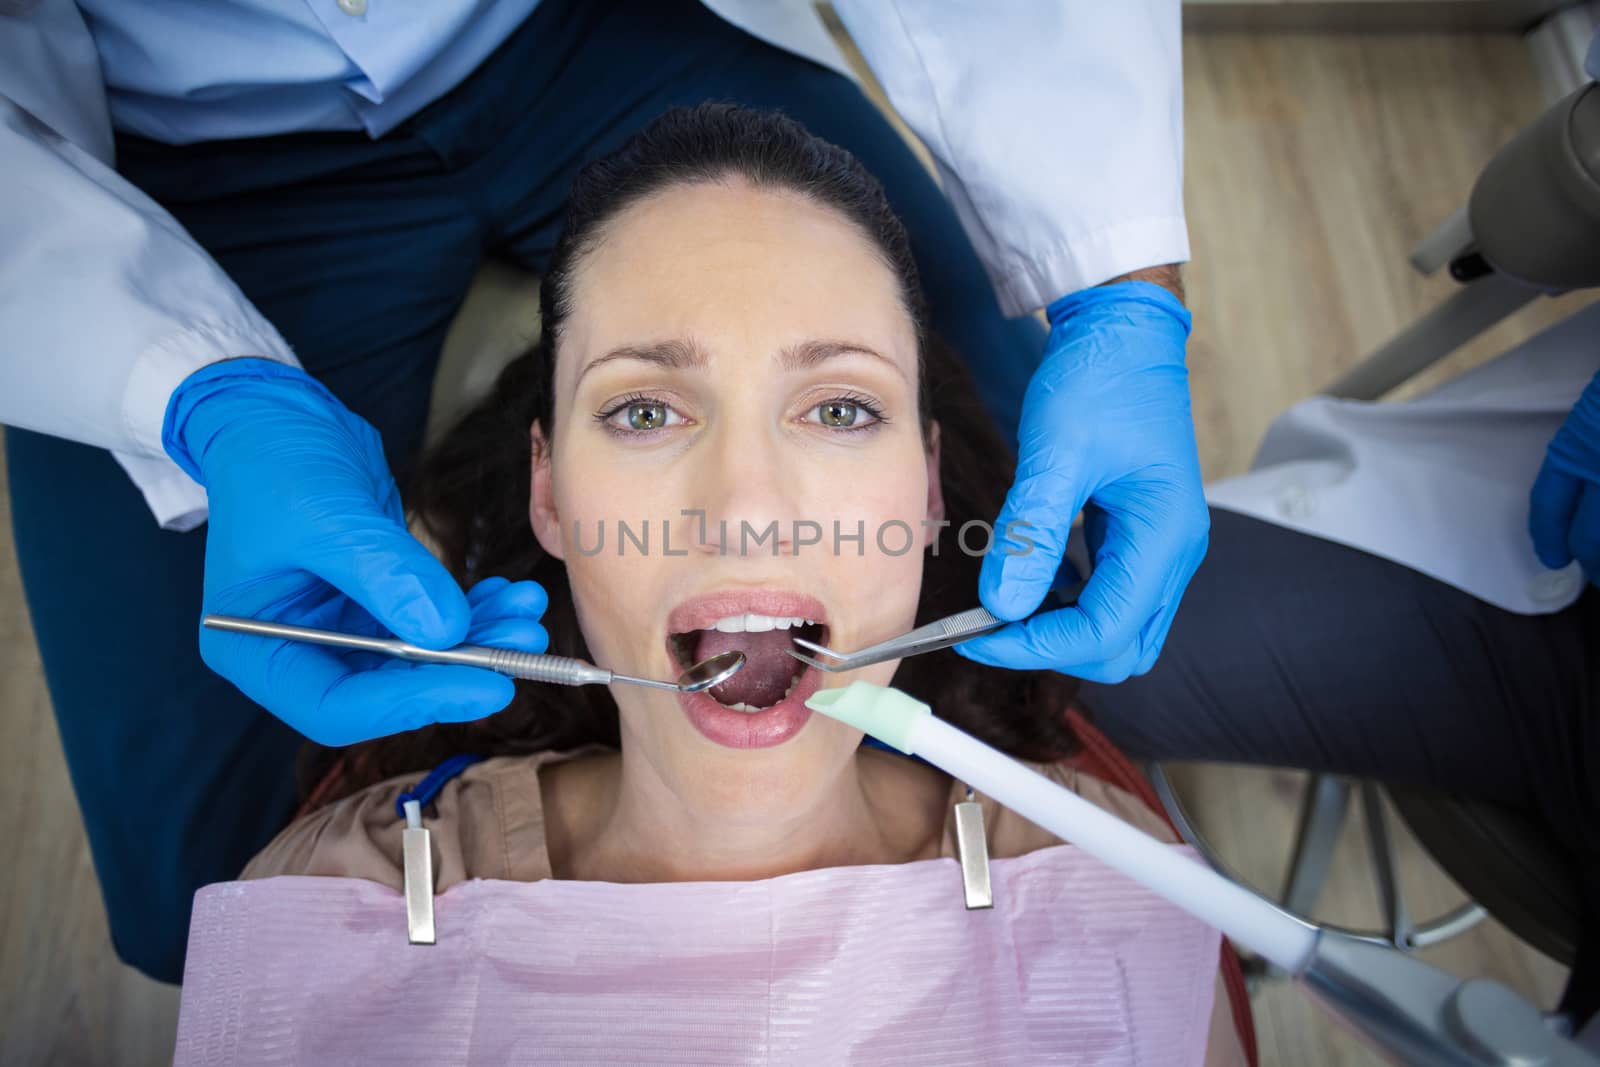 Dentist examining a female patient with tools by Wavebreakmedia